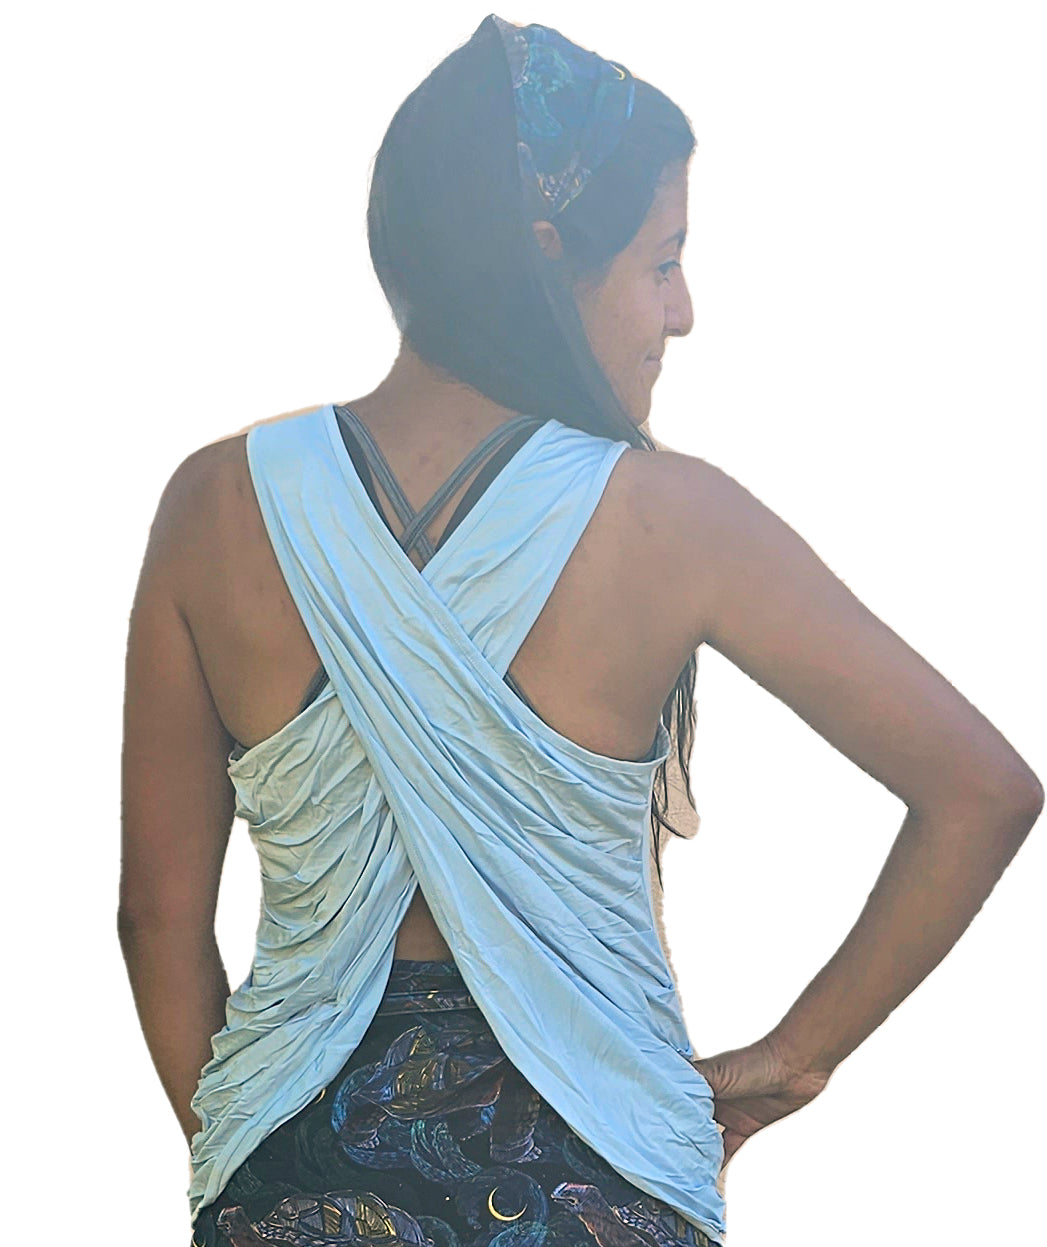 Yogaz Eco-Friendly Bamboo Bow Tank Top in Light Blue